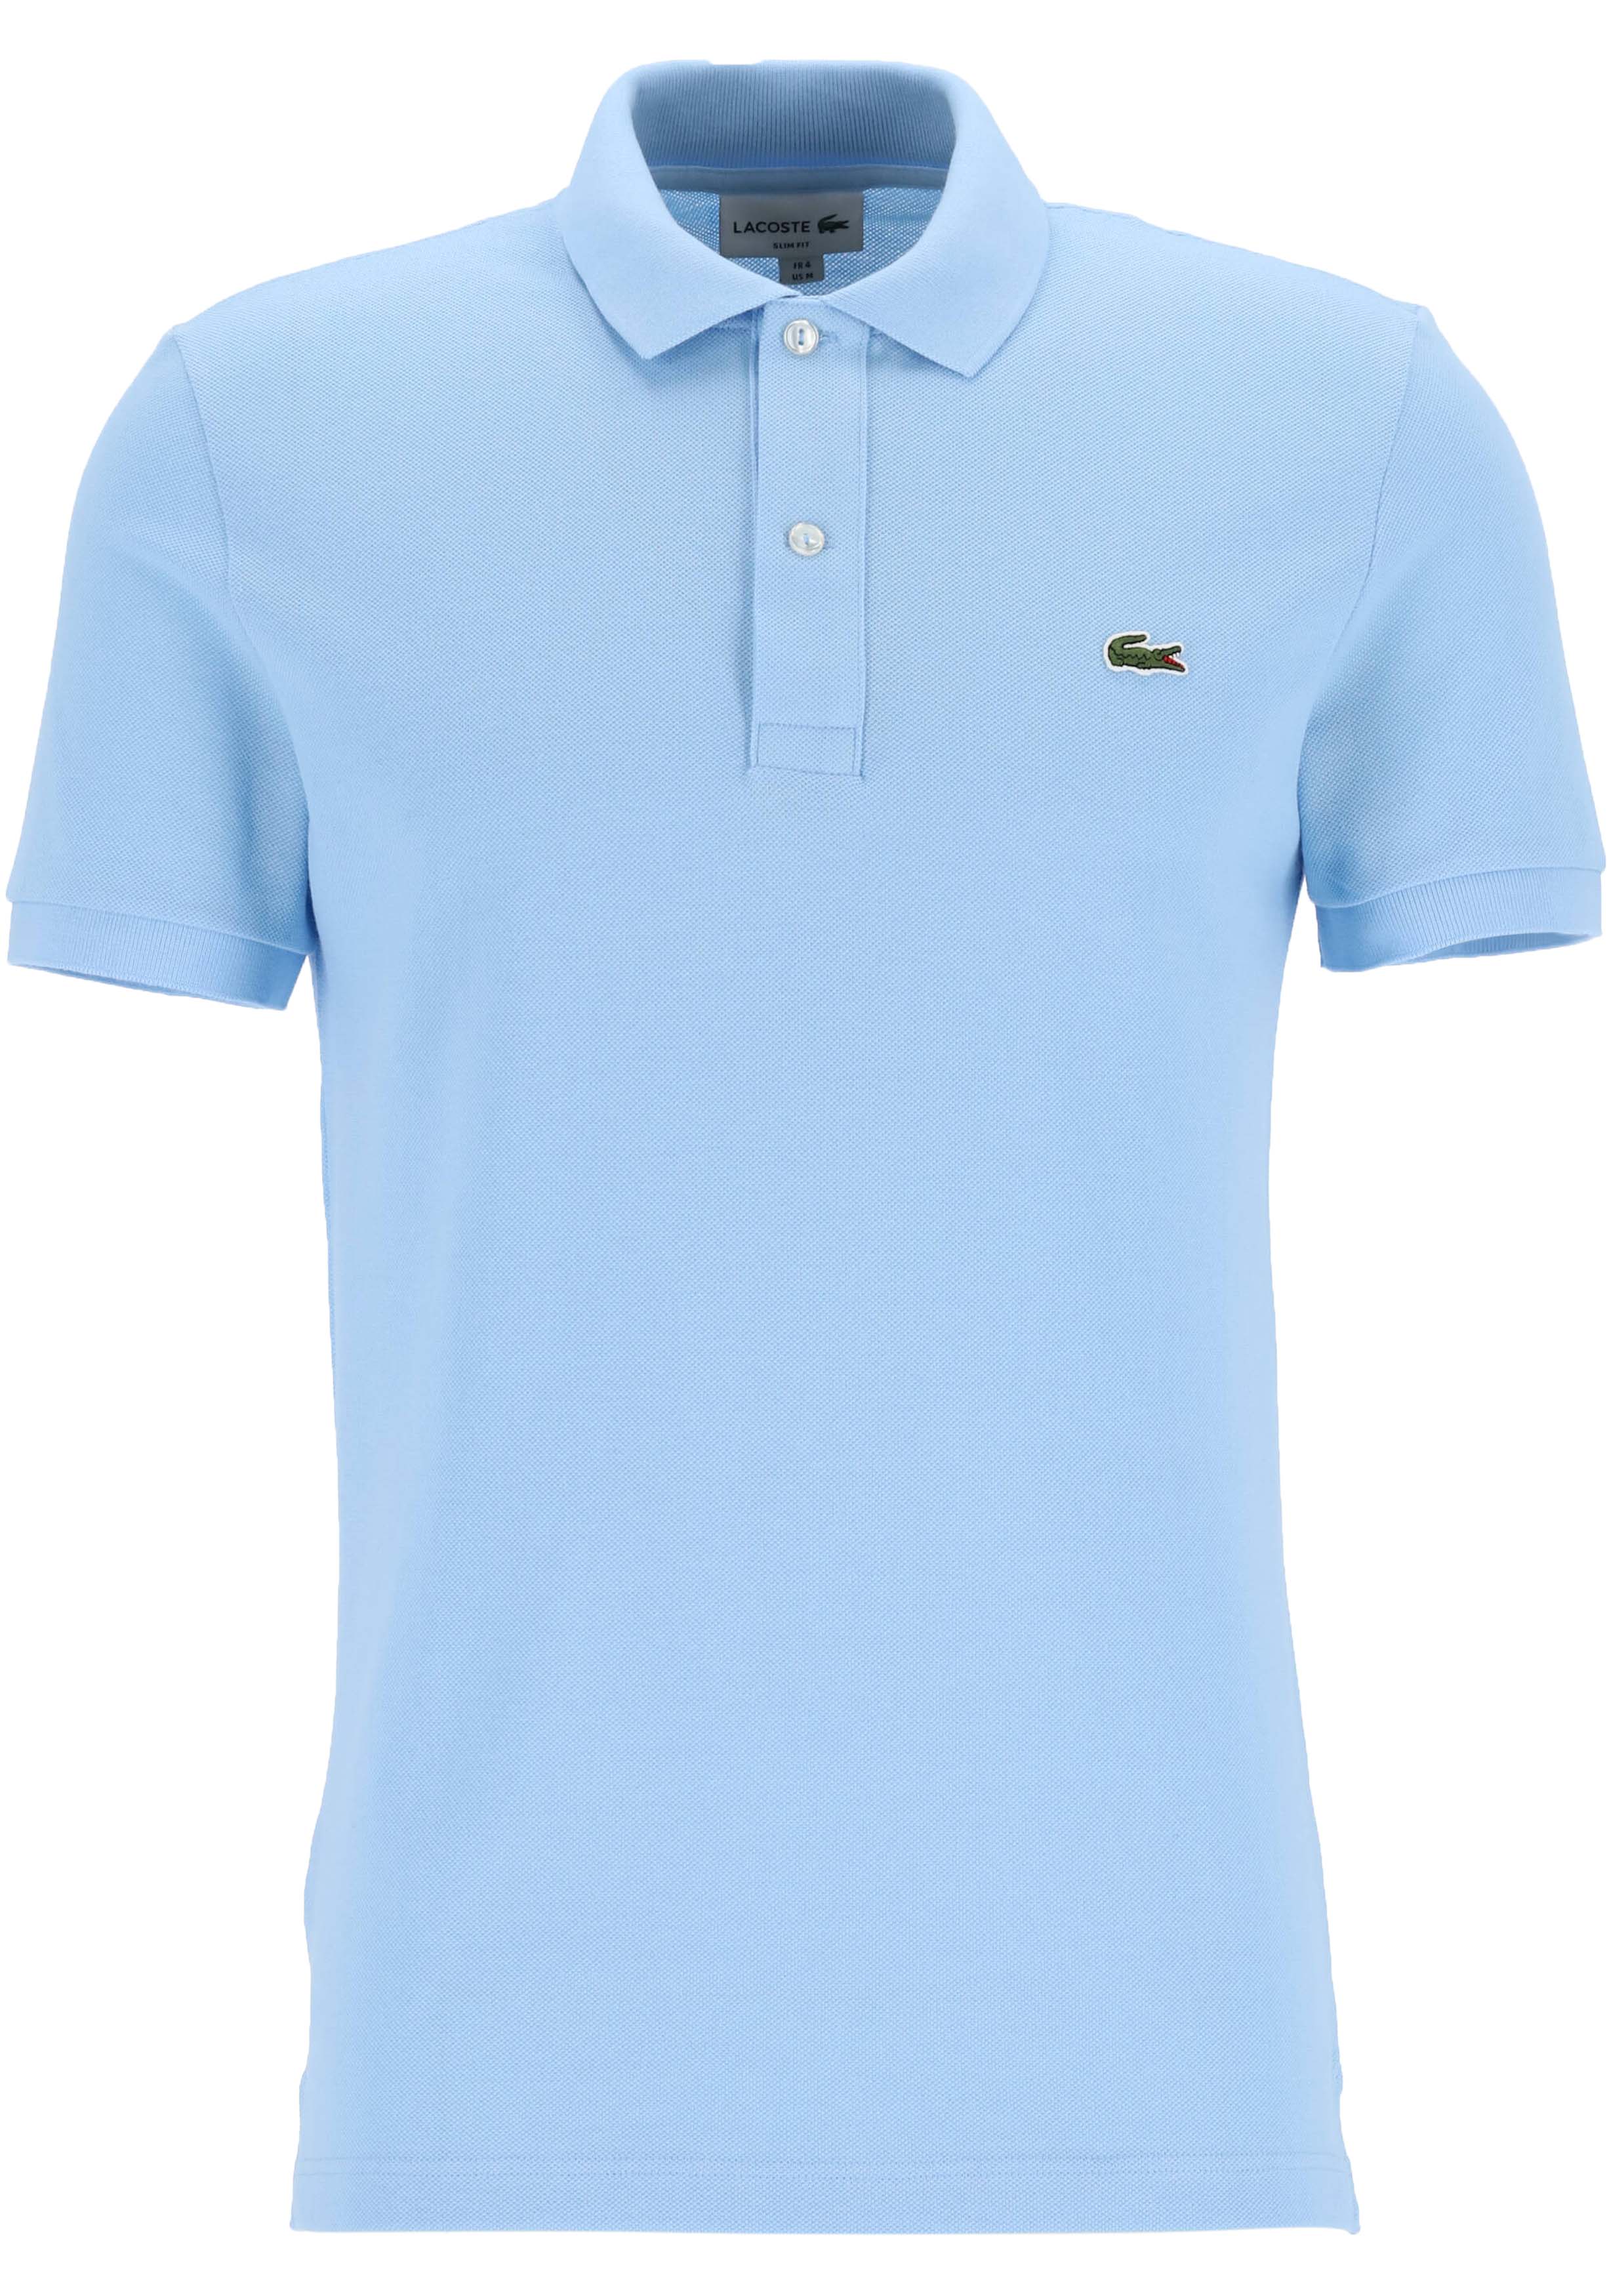 Lacoste Slim Fit polo, lucht blauw